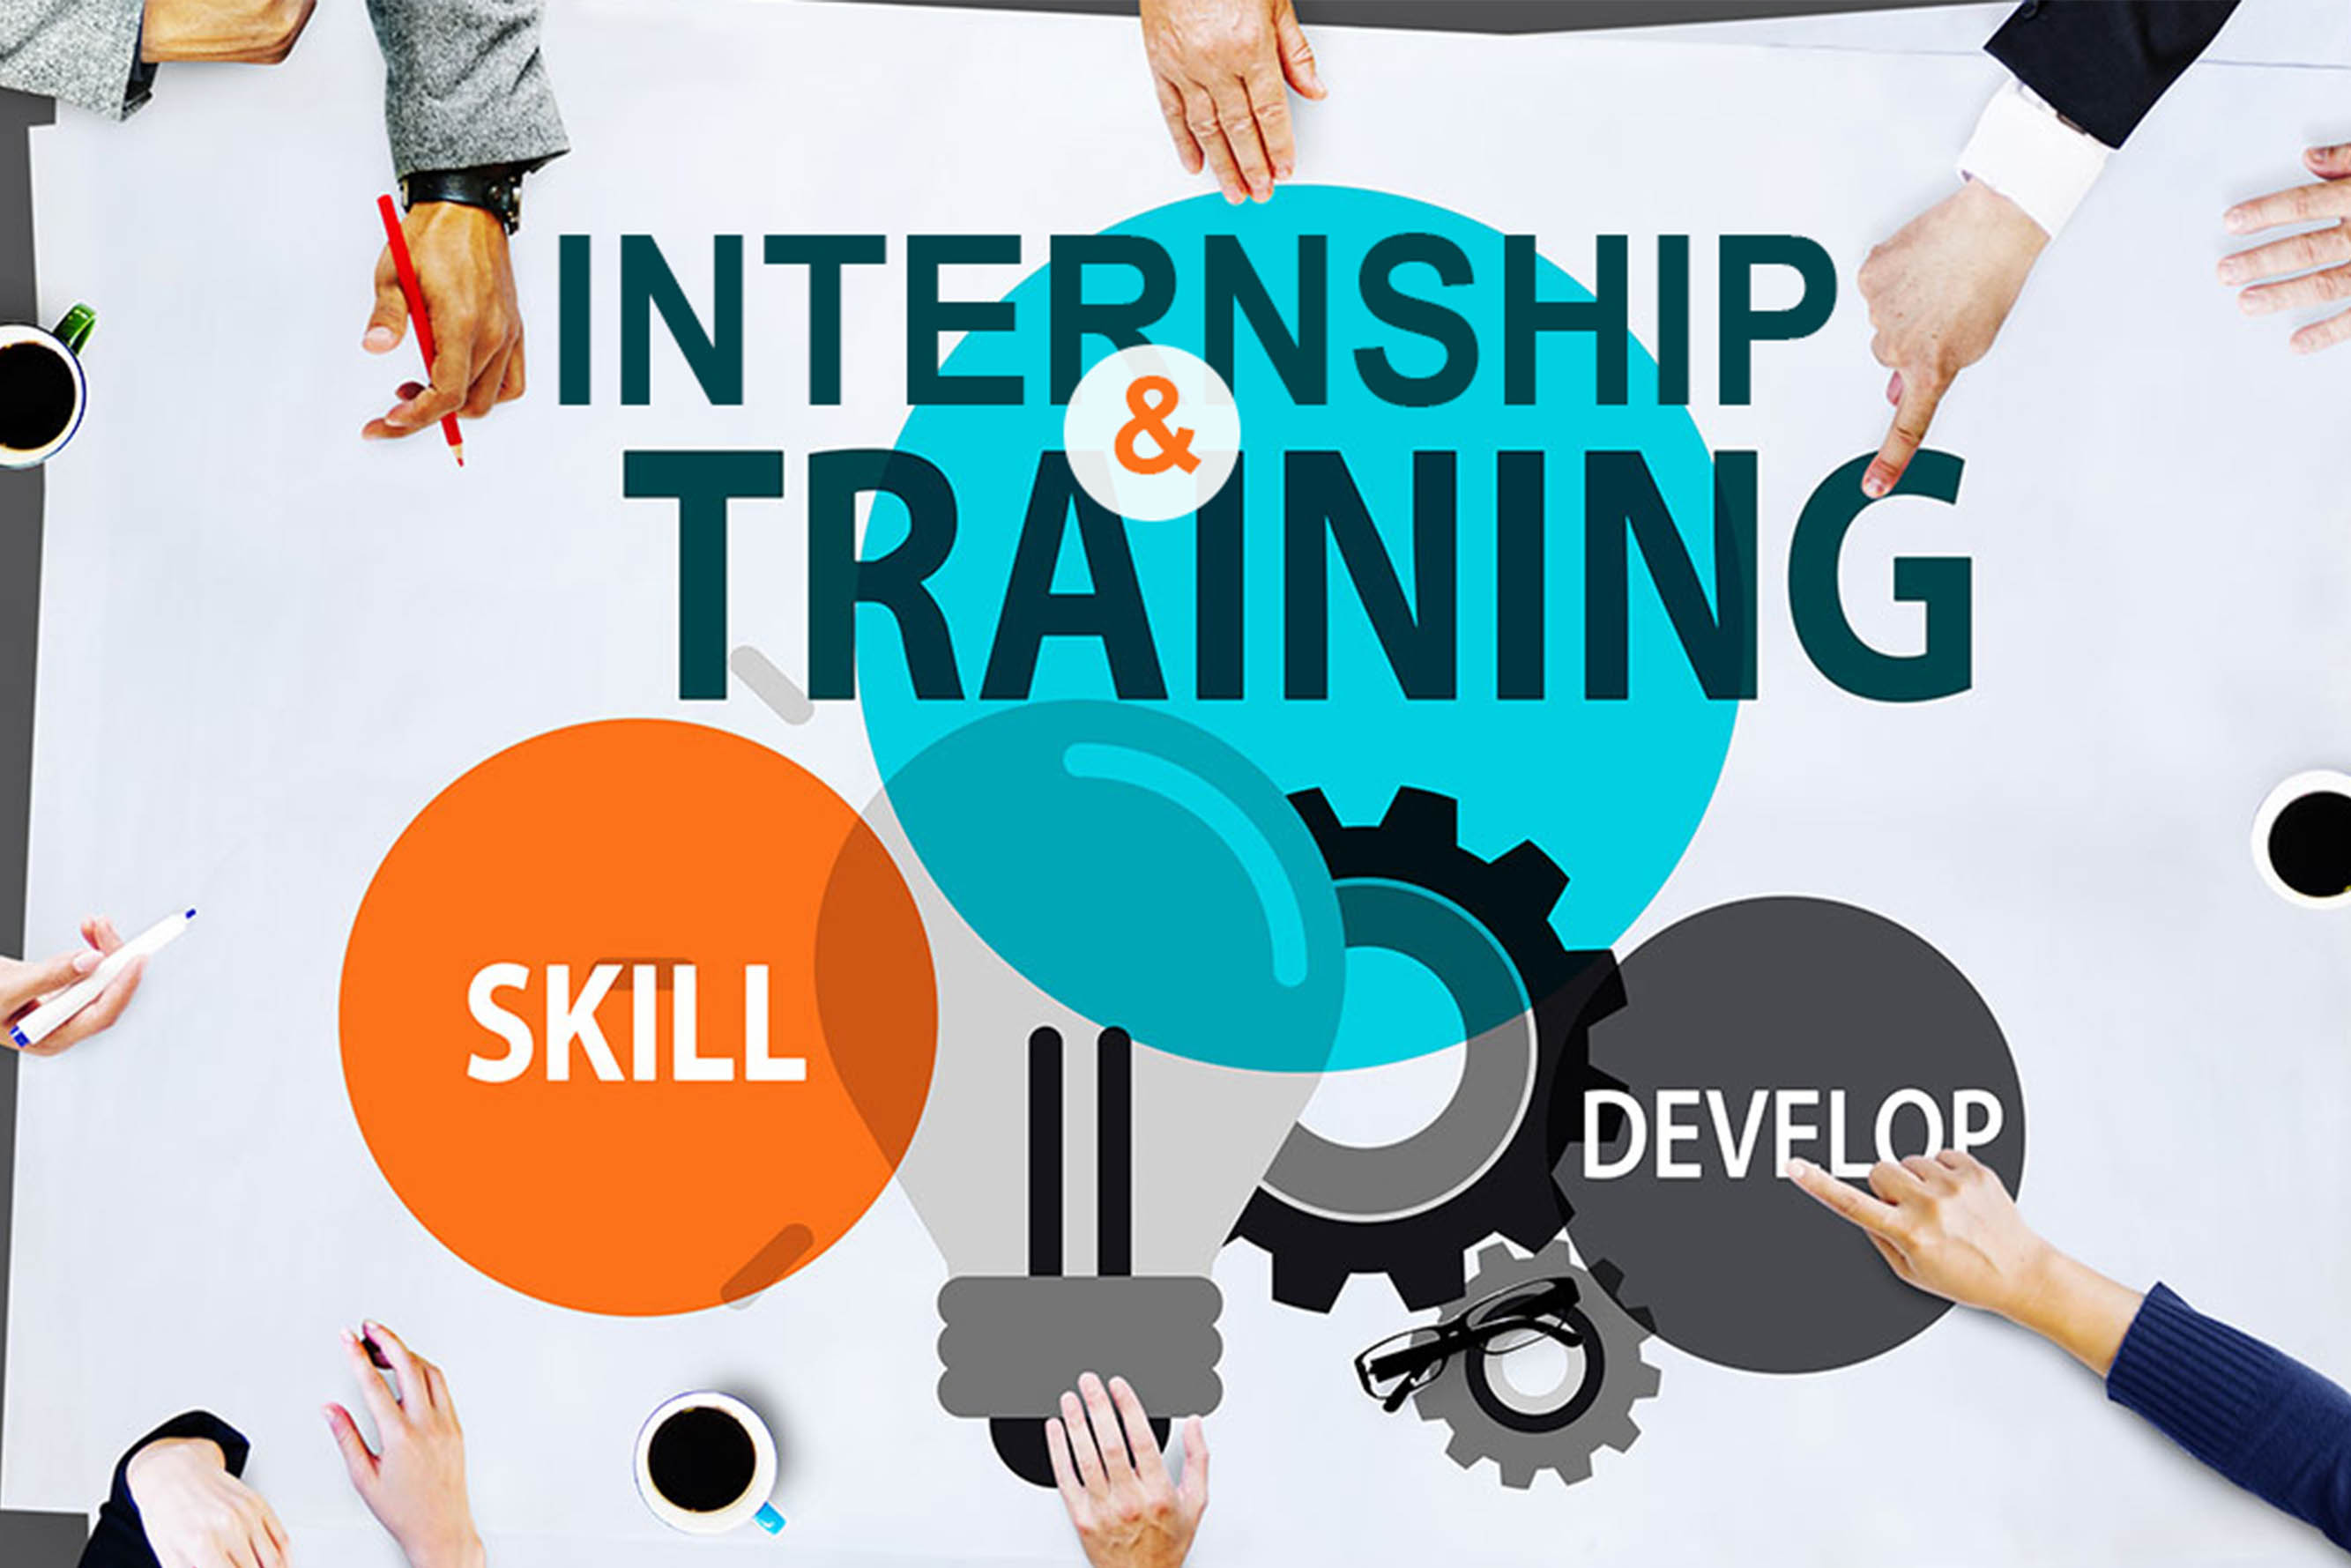 What is difference between IT Training & IT Internship?